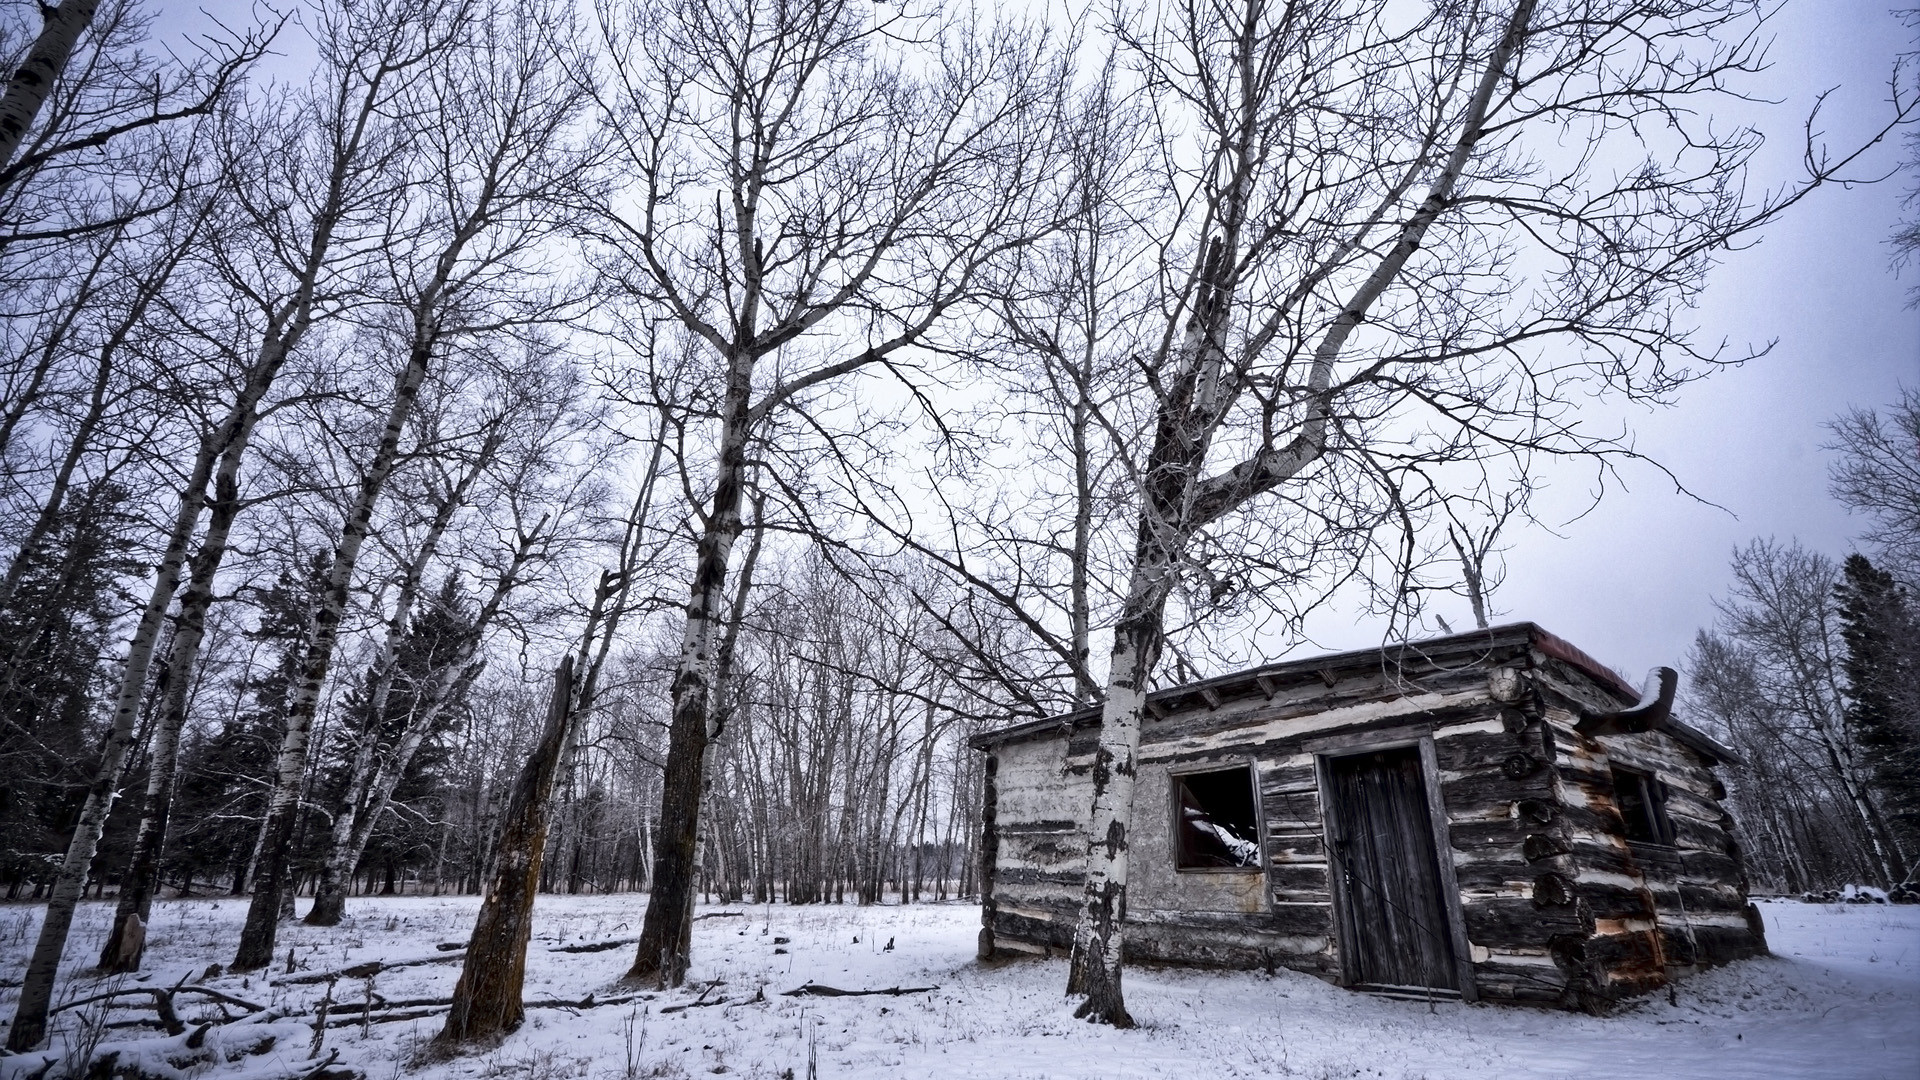 1920x1080 Earth - Winter Window Door Forest Wood Log House Tree Cold Wilderness Sky  Photography Landscape Snow